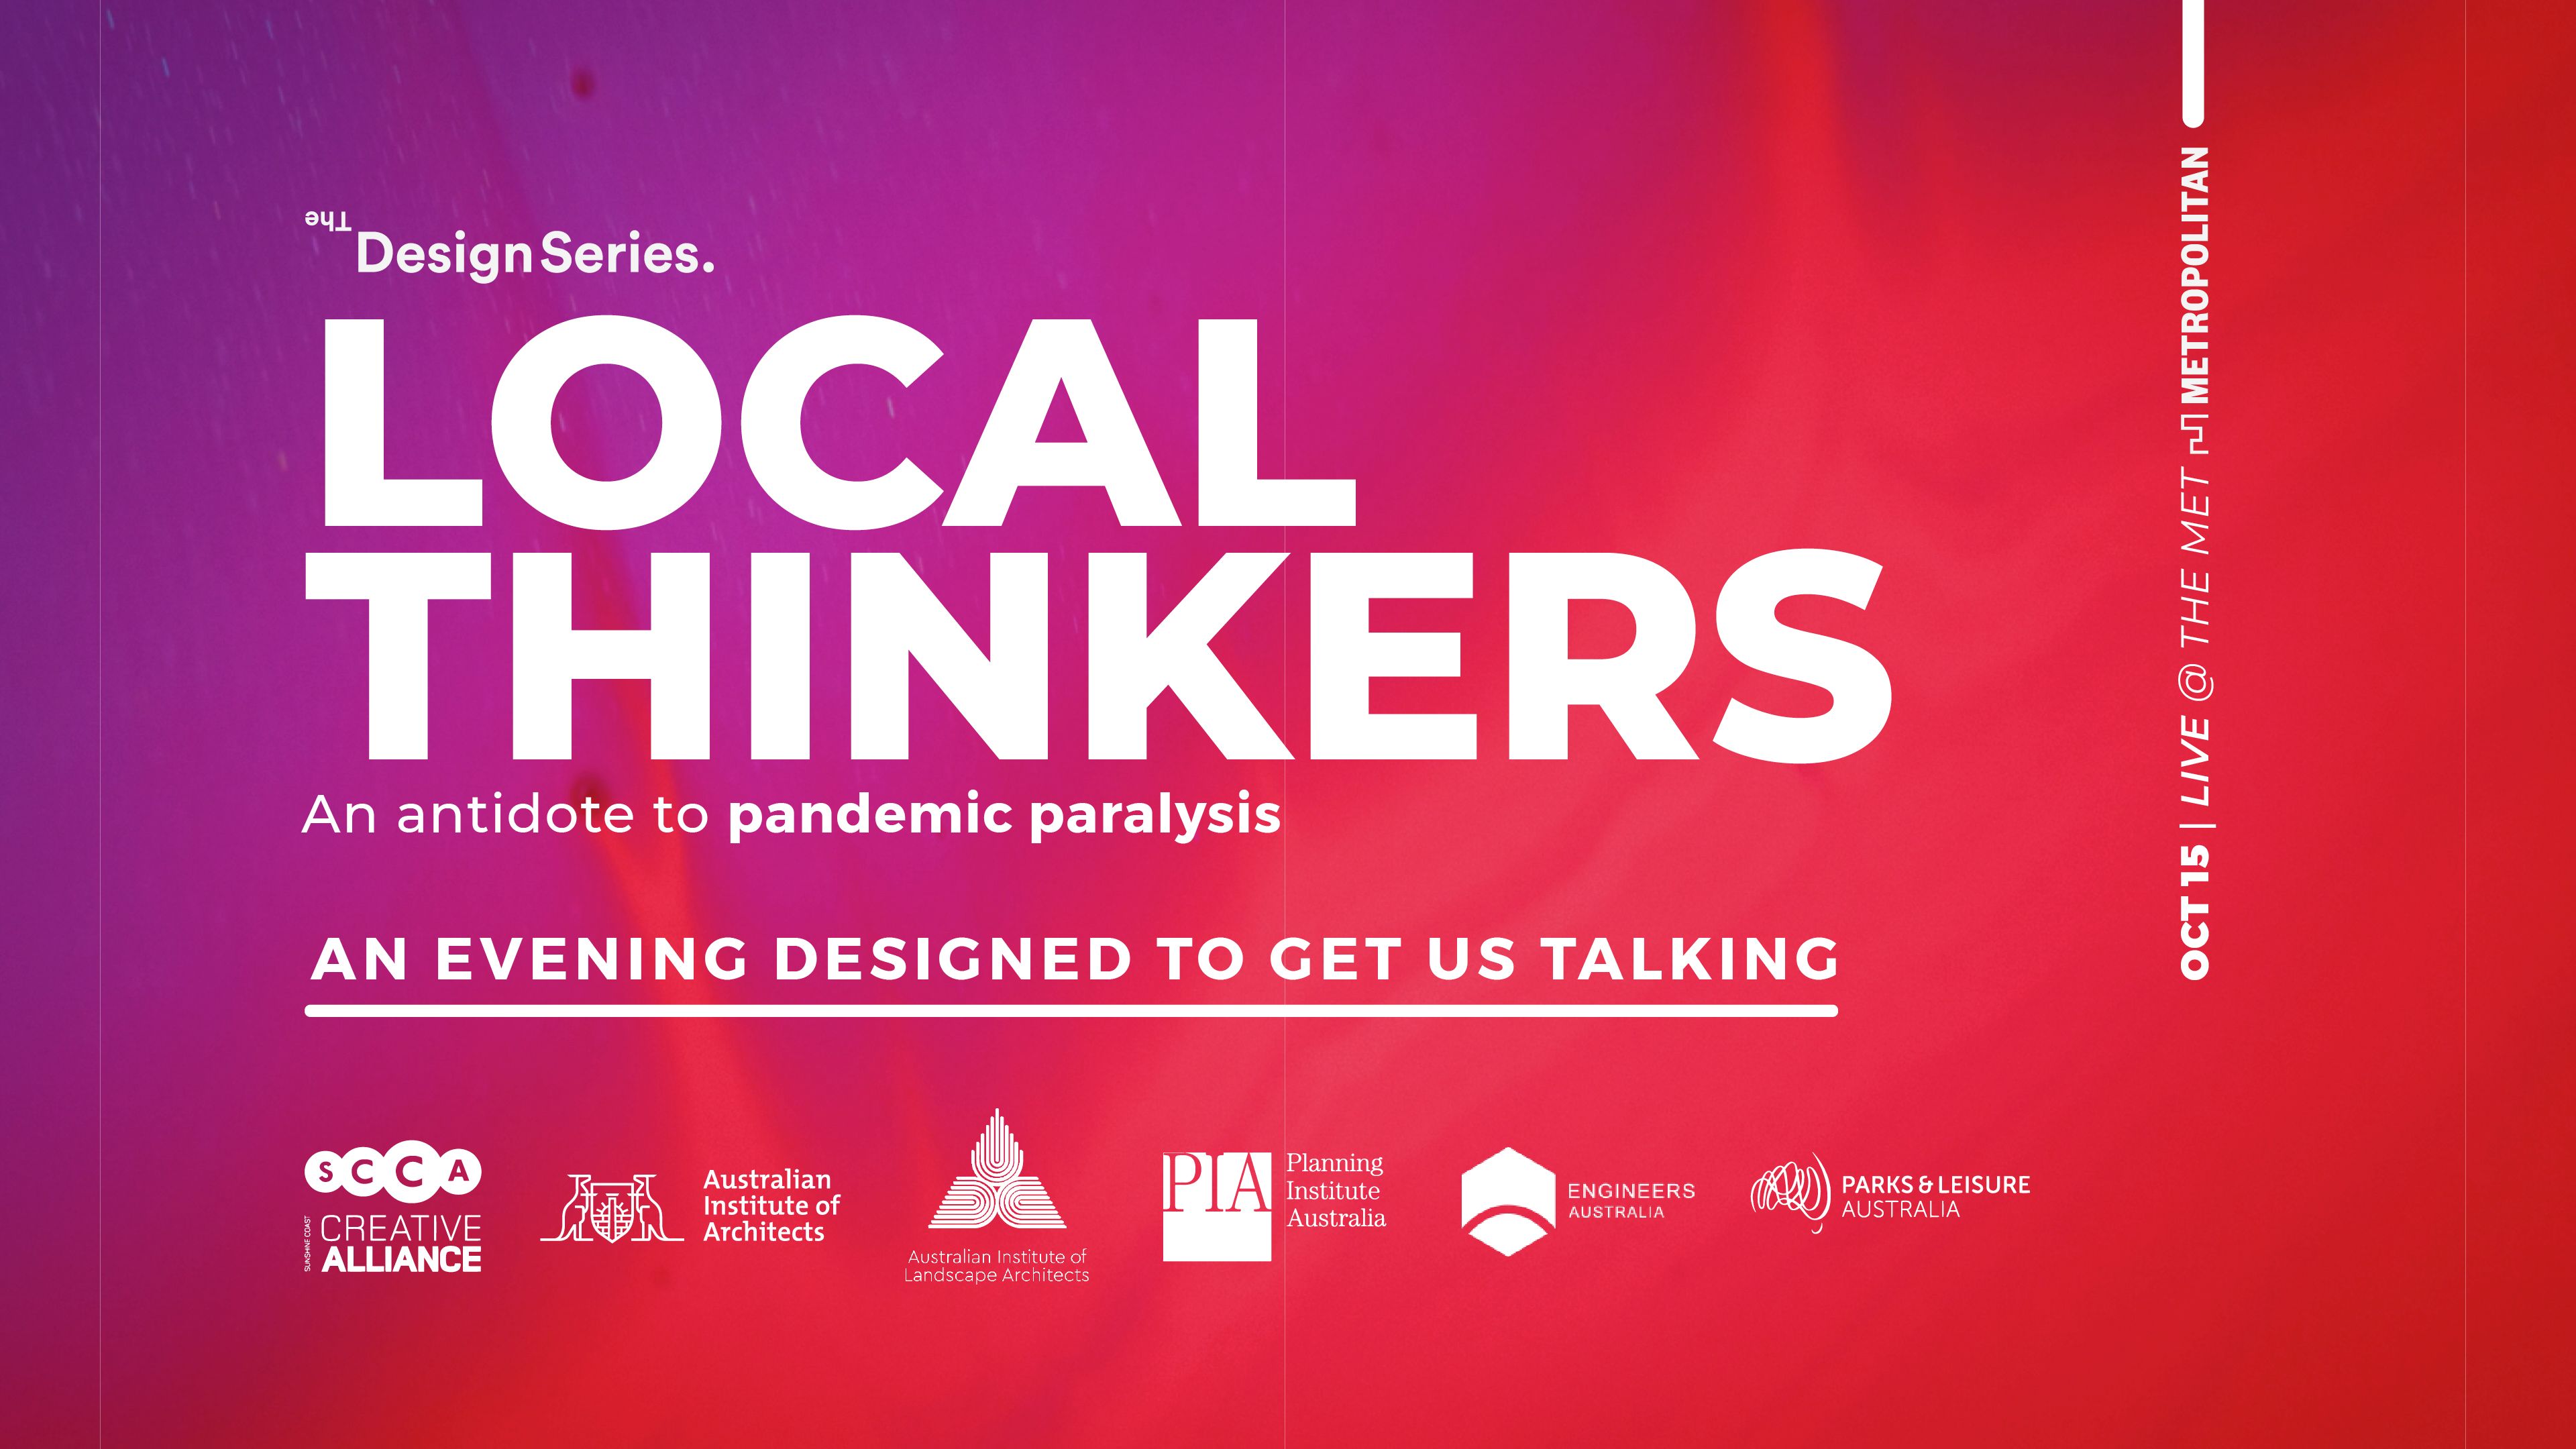 The Design Series | Local Thinkers - An antidote to pandemic paralysis feature image